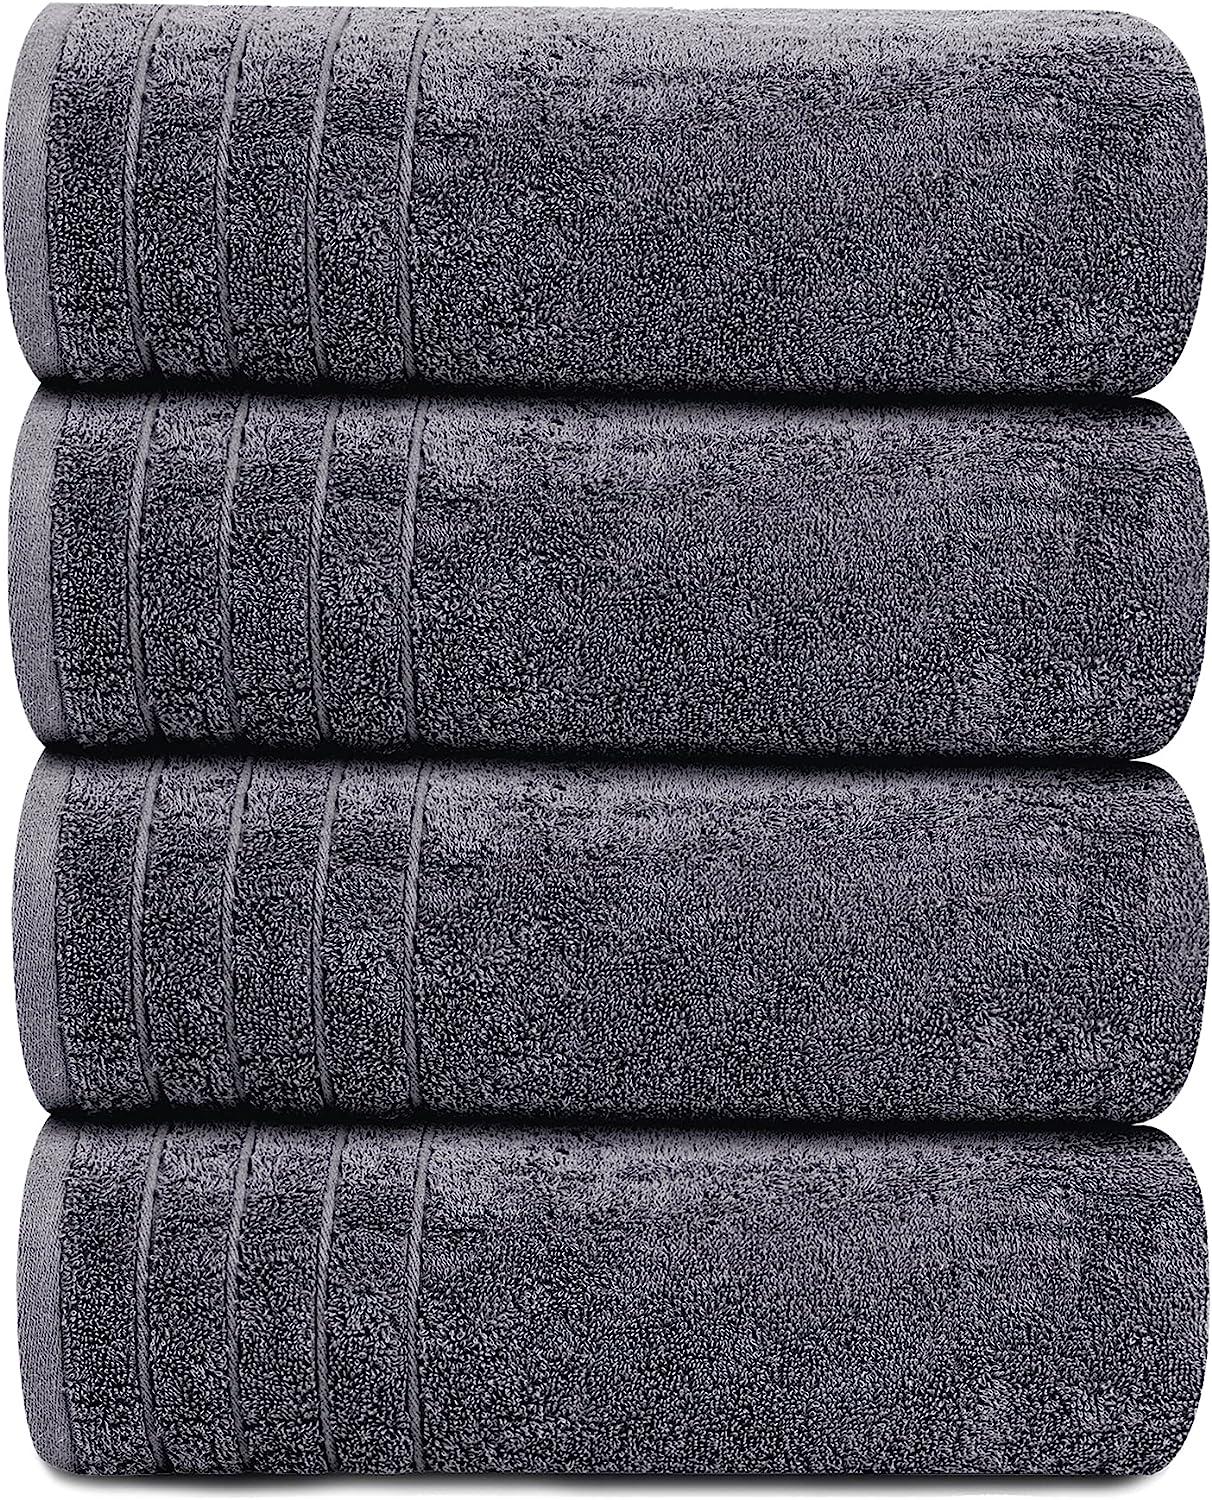 Tens Towels Large Bath Towels, 100% Cotton Towels, 30 x 60 Inches, Extra Large  Bath Towels, Lighter Weight & Super Absorbent, Quick Dry, Perfect Bathroom  Towels for Daily Use 4PK BATH TOWELS